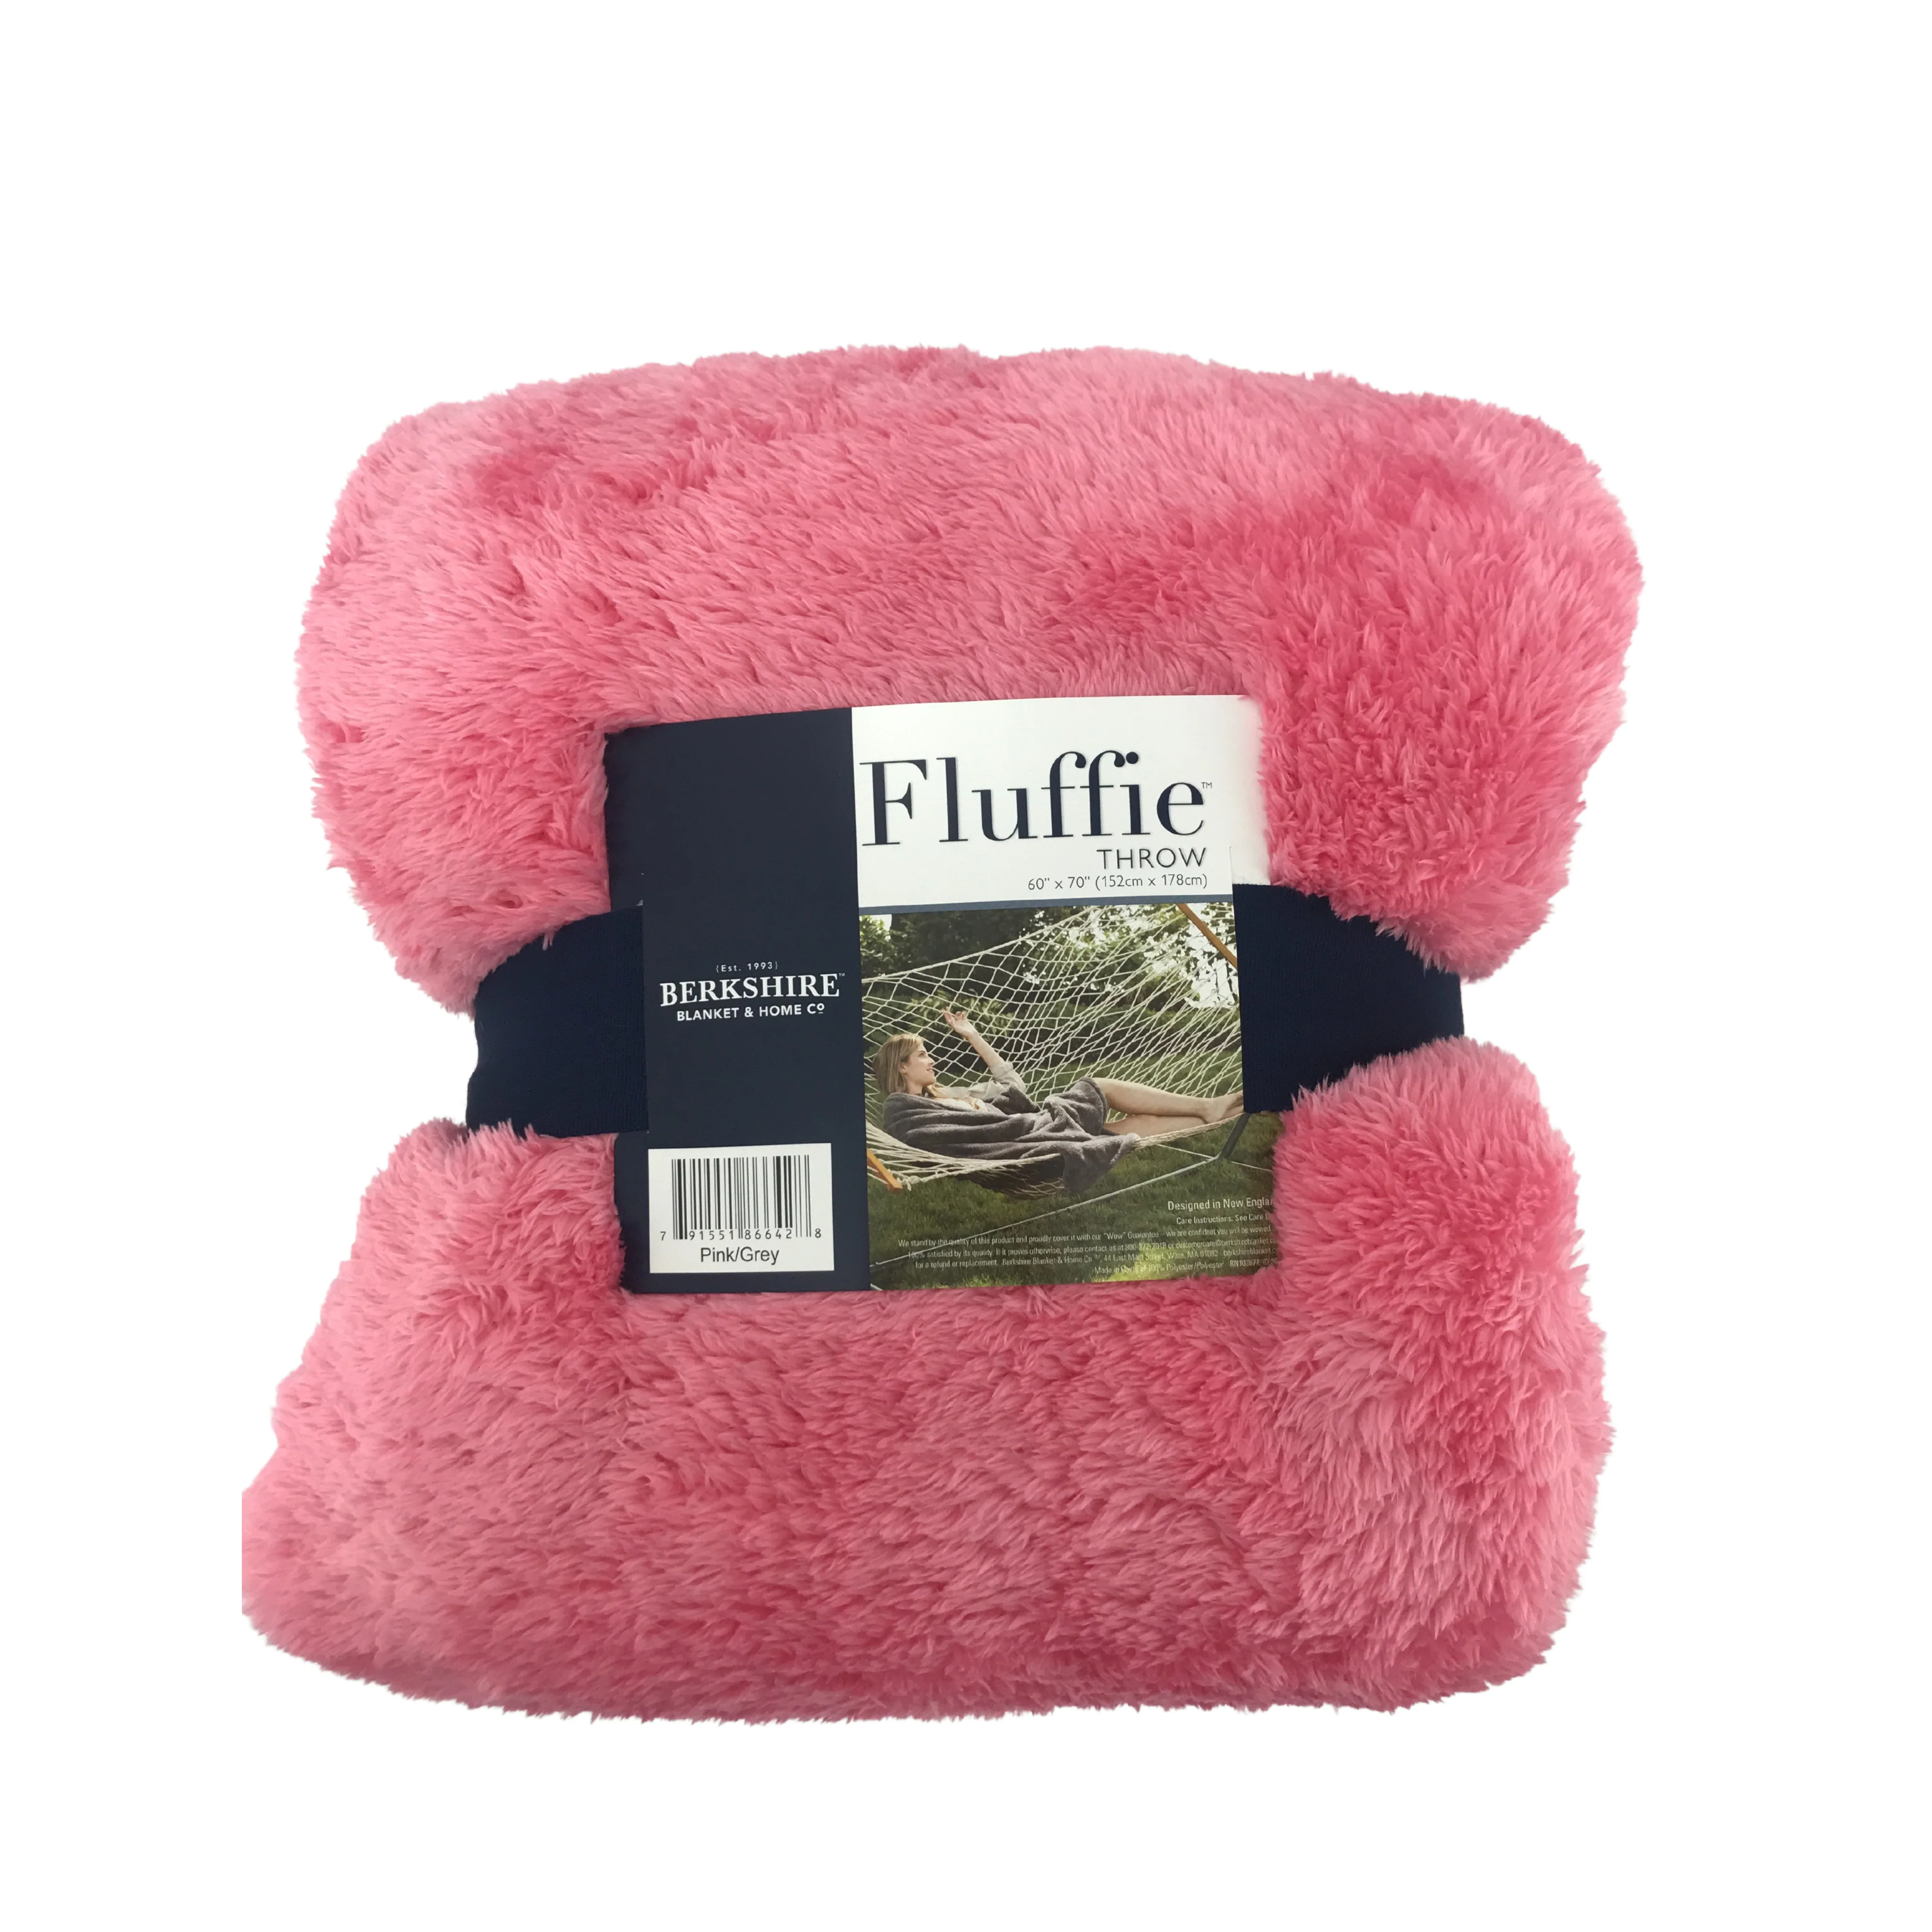 Berkshire Fluffie Throw Blanket / Pink / Grey / 2 Pack / Couch Throw / Bed Throw